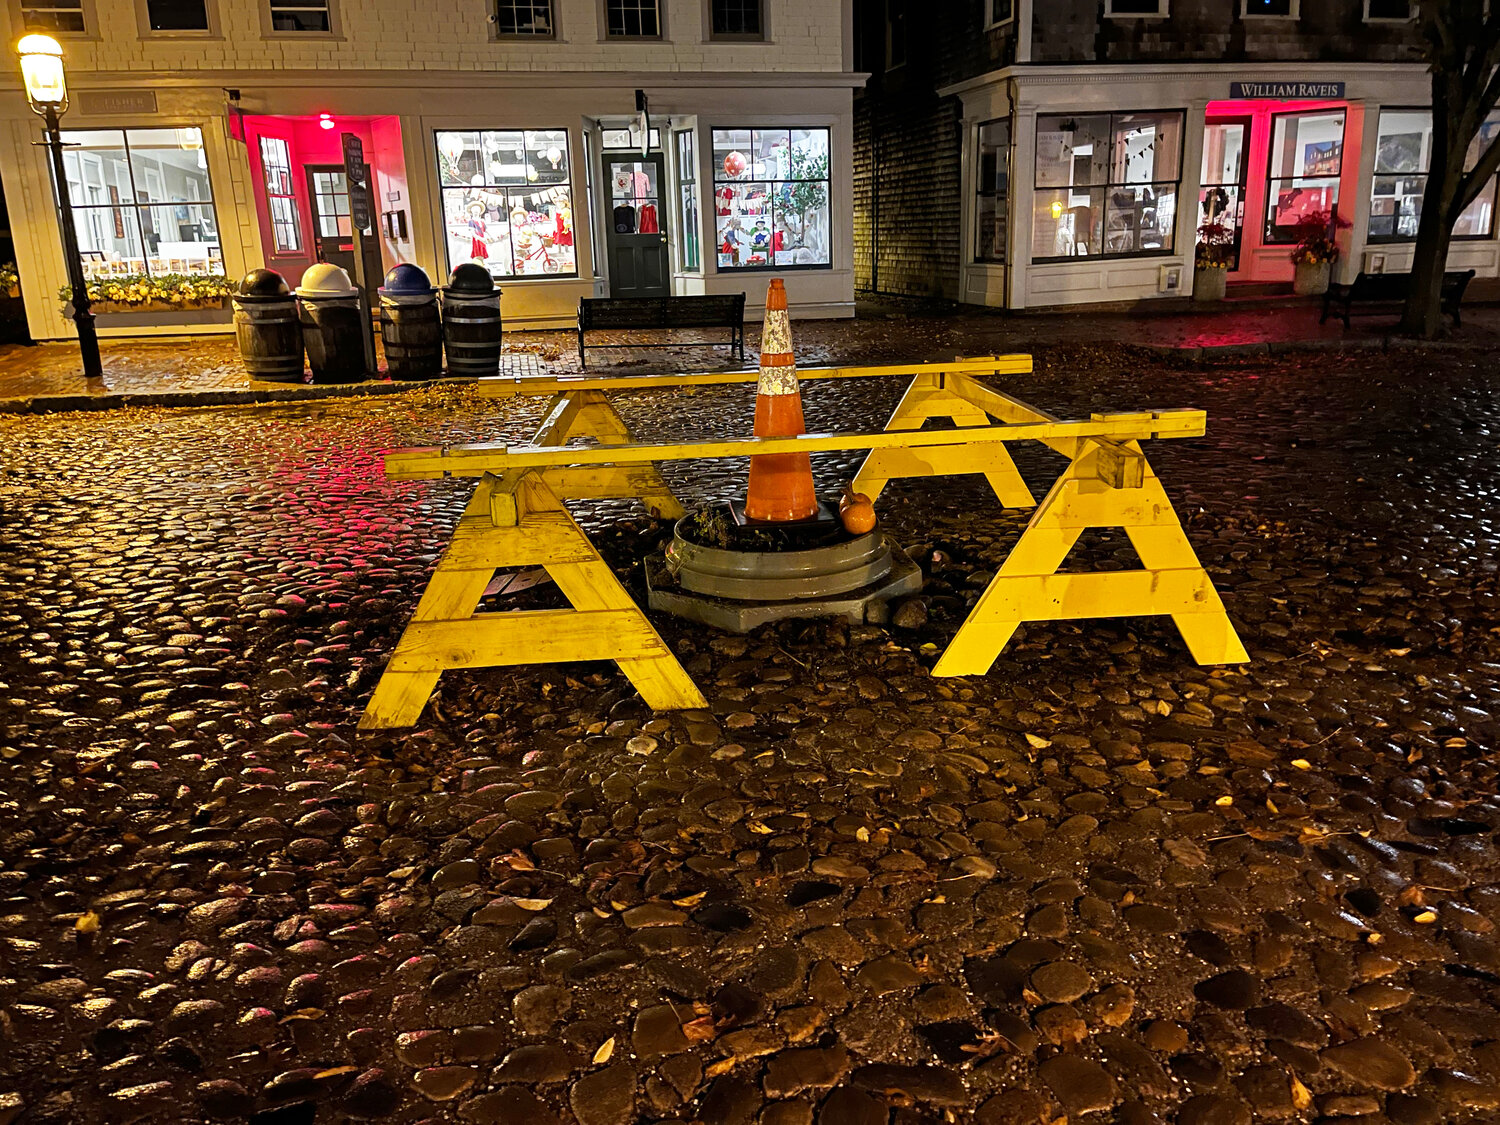 All that remained Monday morning were sawhorses surrounding the base of the fountain with a plastic orange traffic cone in the middle. The iconic fountain was struck by a vehicle Sunday night.